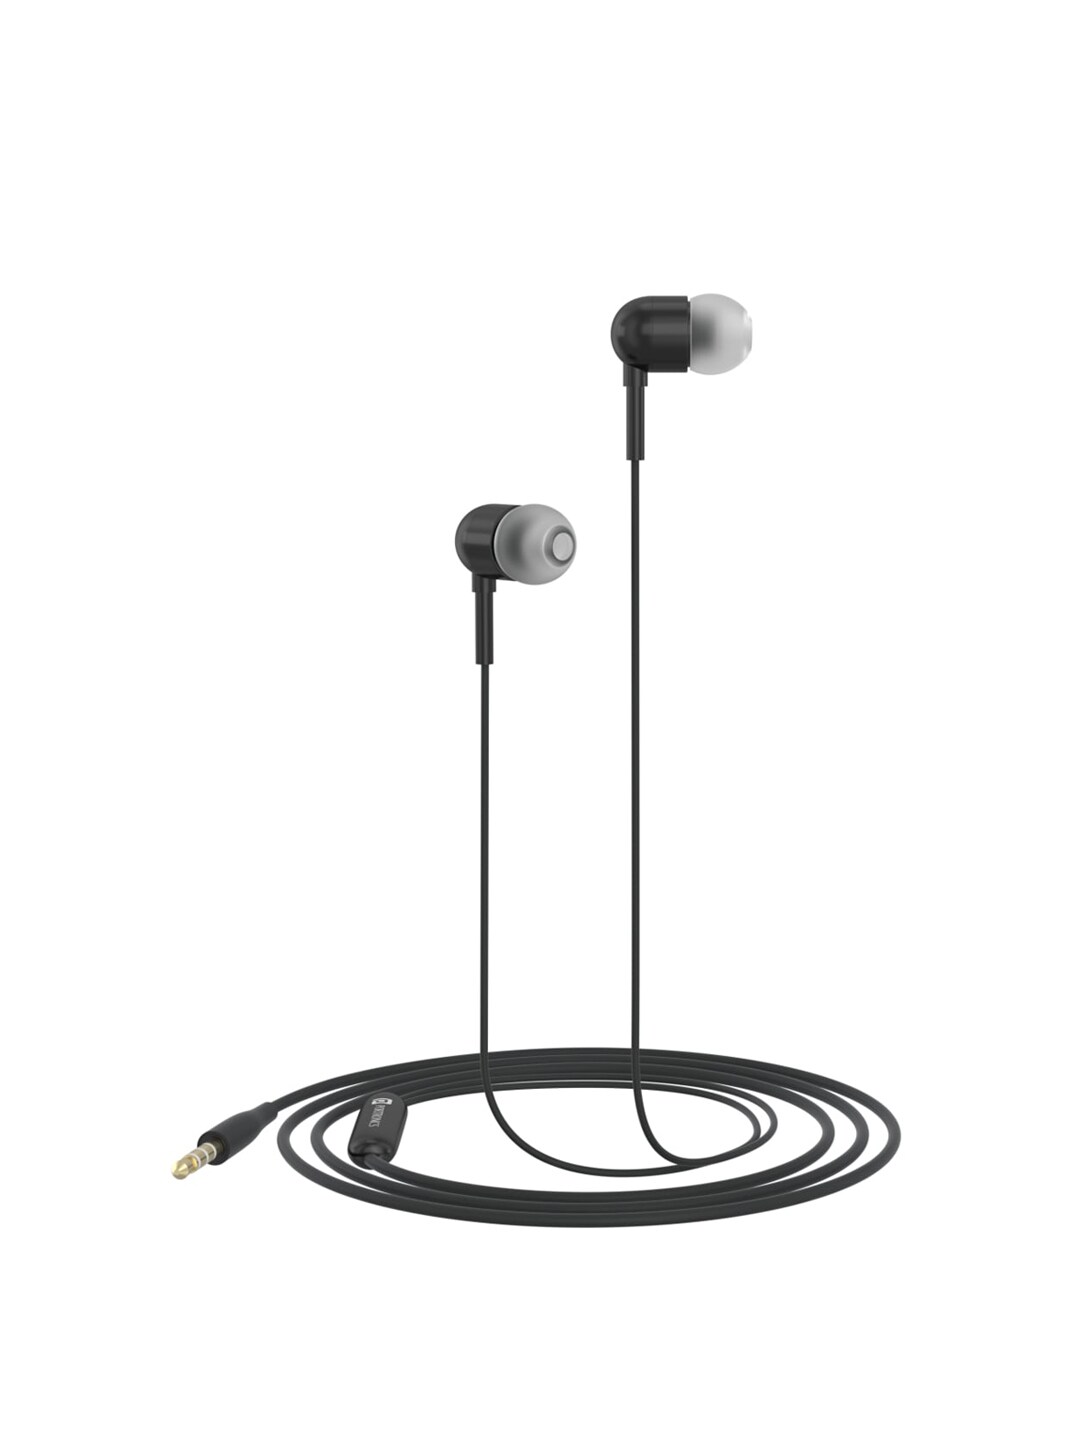 Portronics Black Solid Conch 50 in-Ear Wired Earphone Price in India